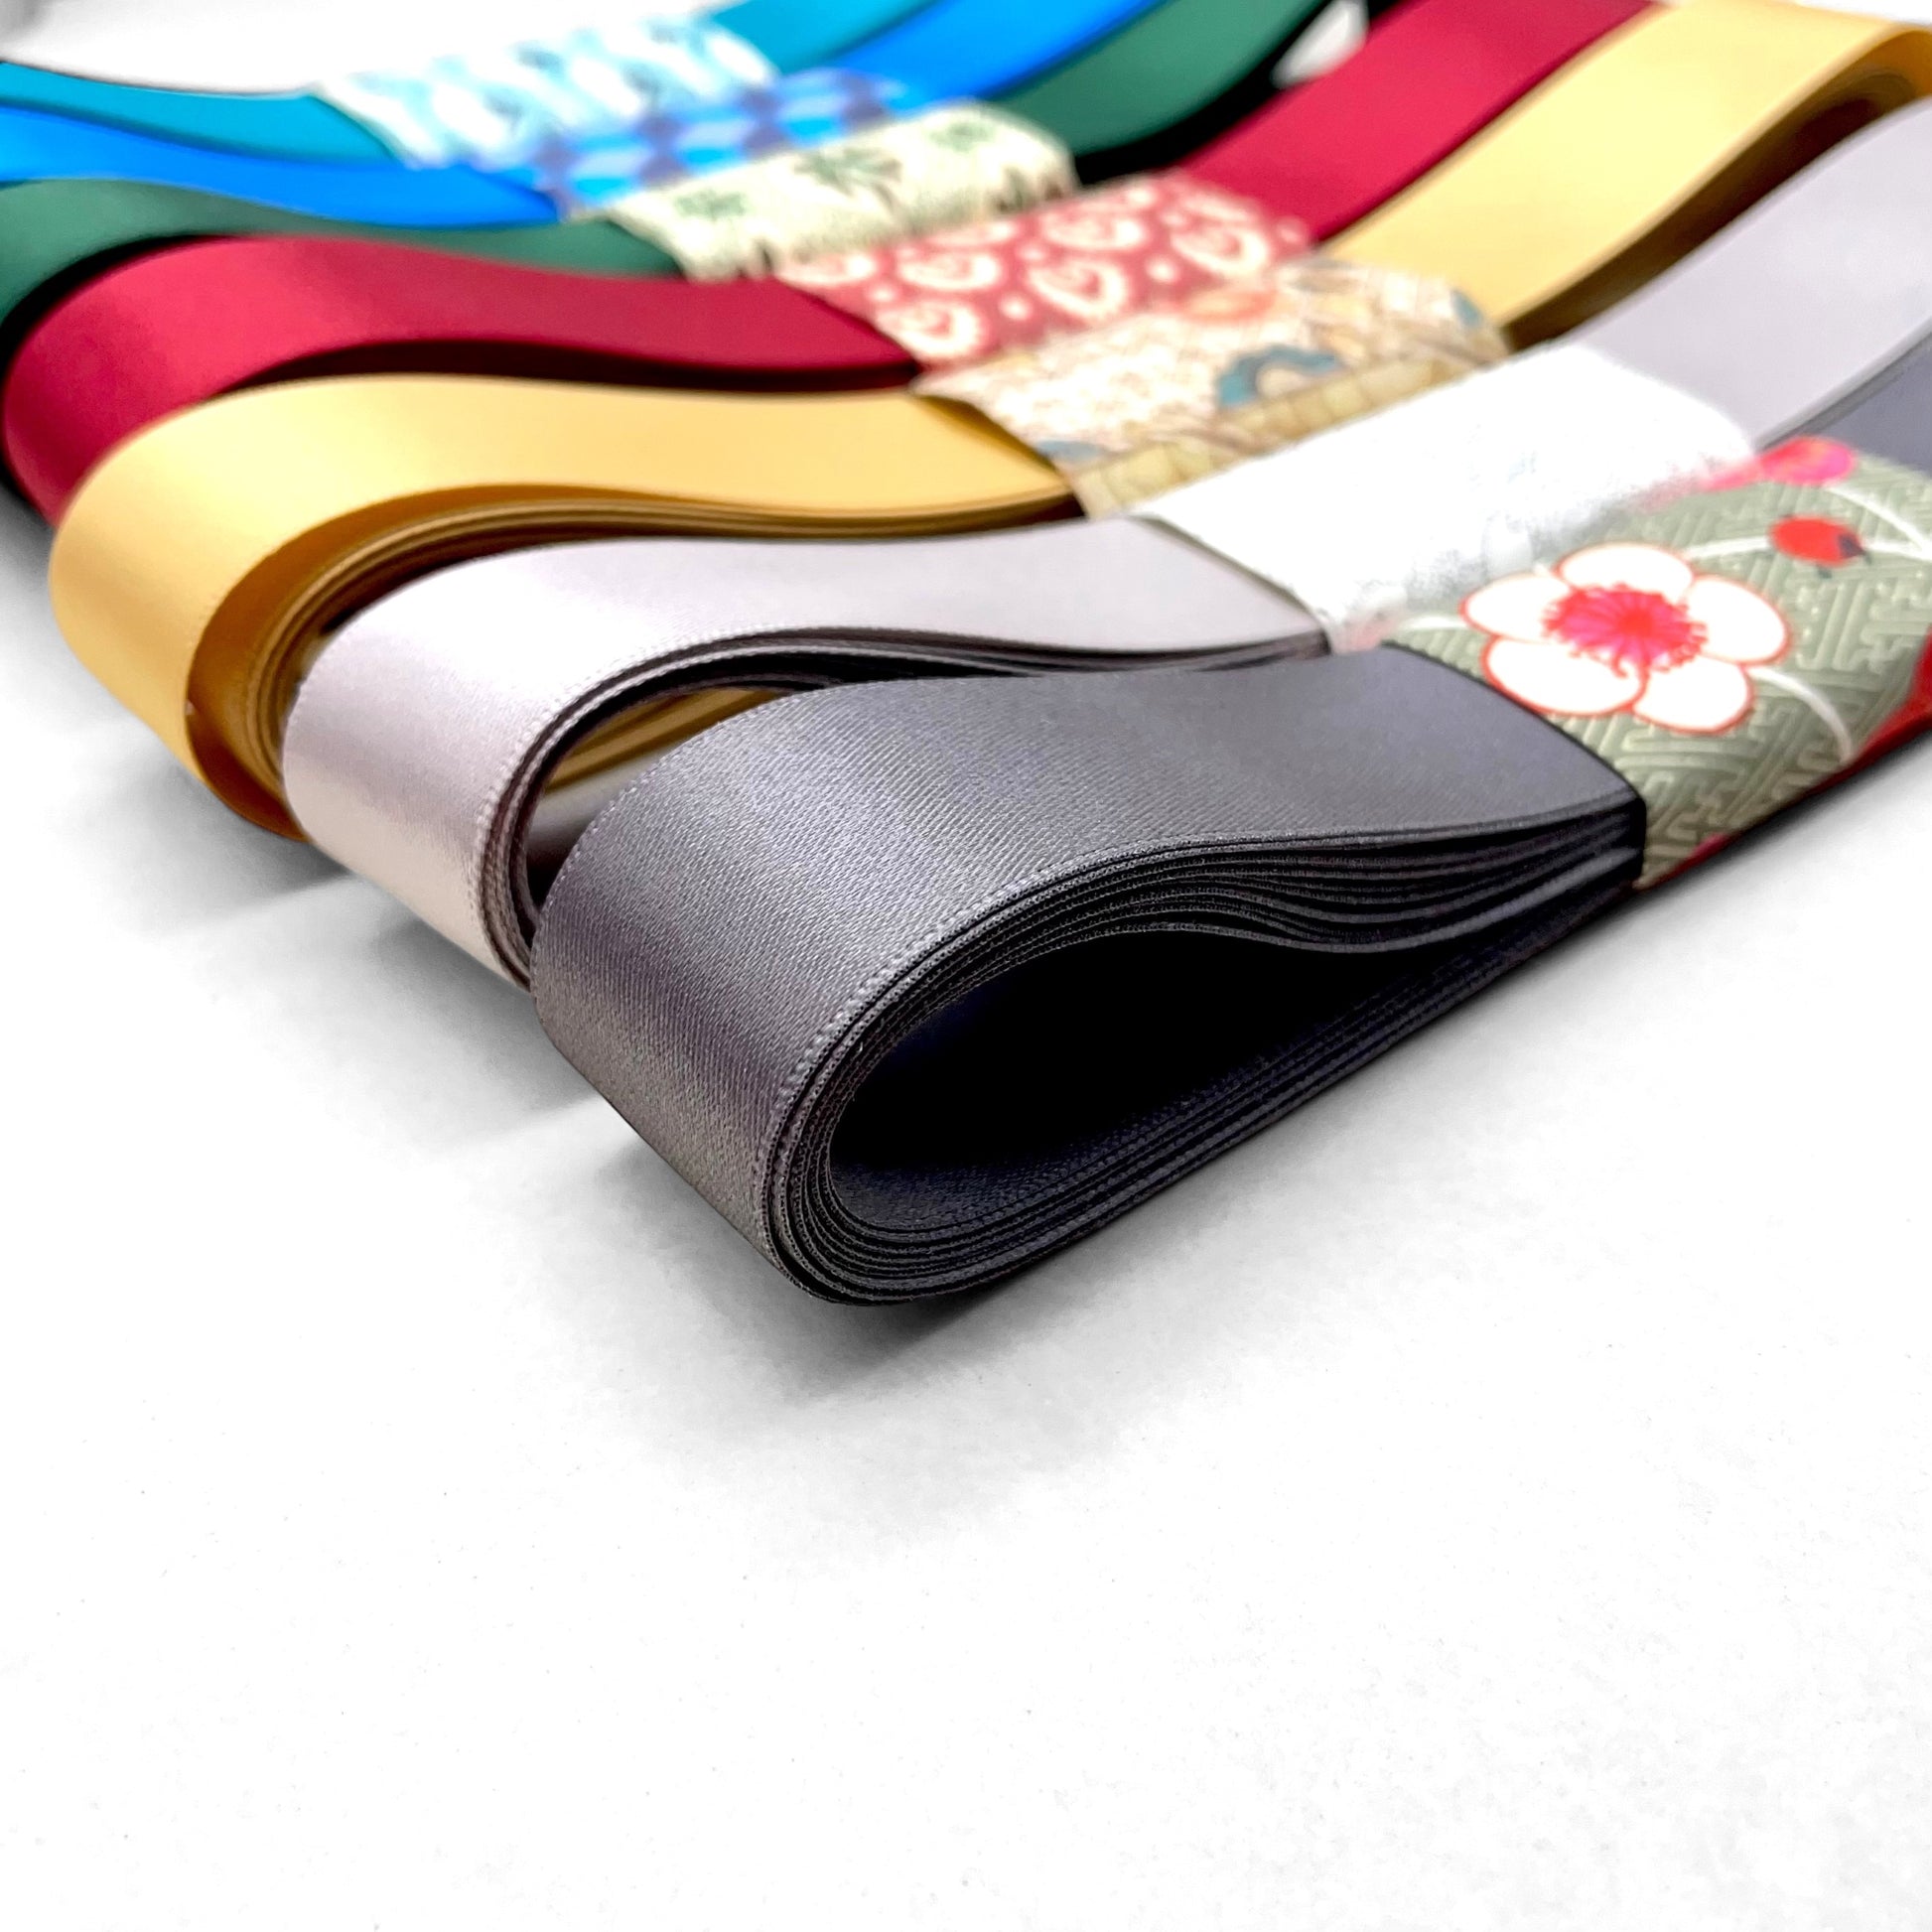 Satin ribbon 25mm wide and 5 metres long, presented with a patterned paper band. colour - smoked grey